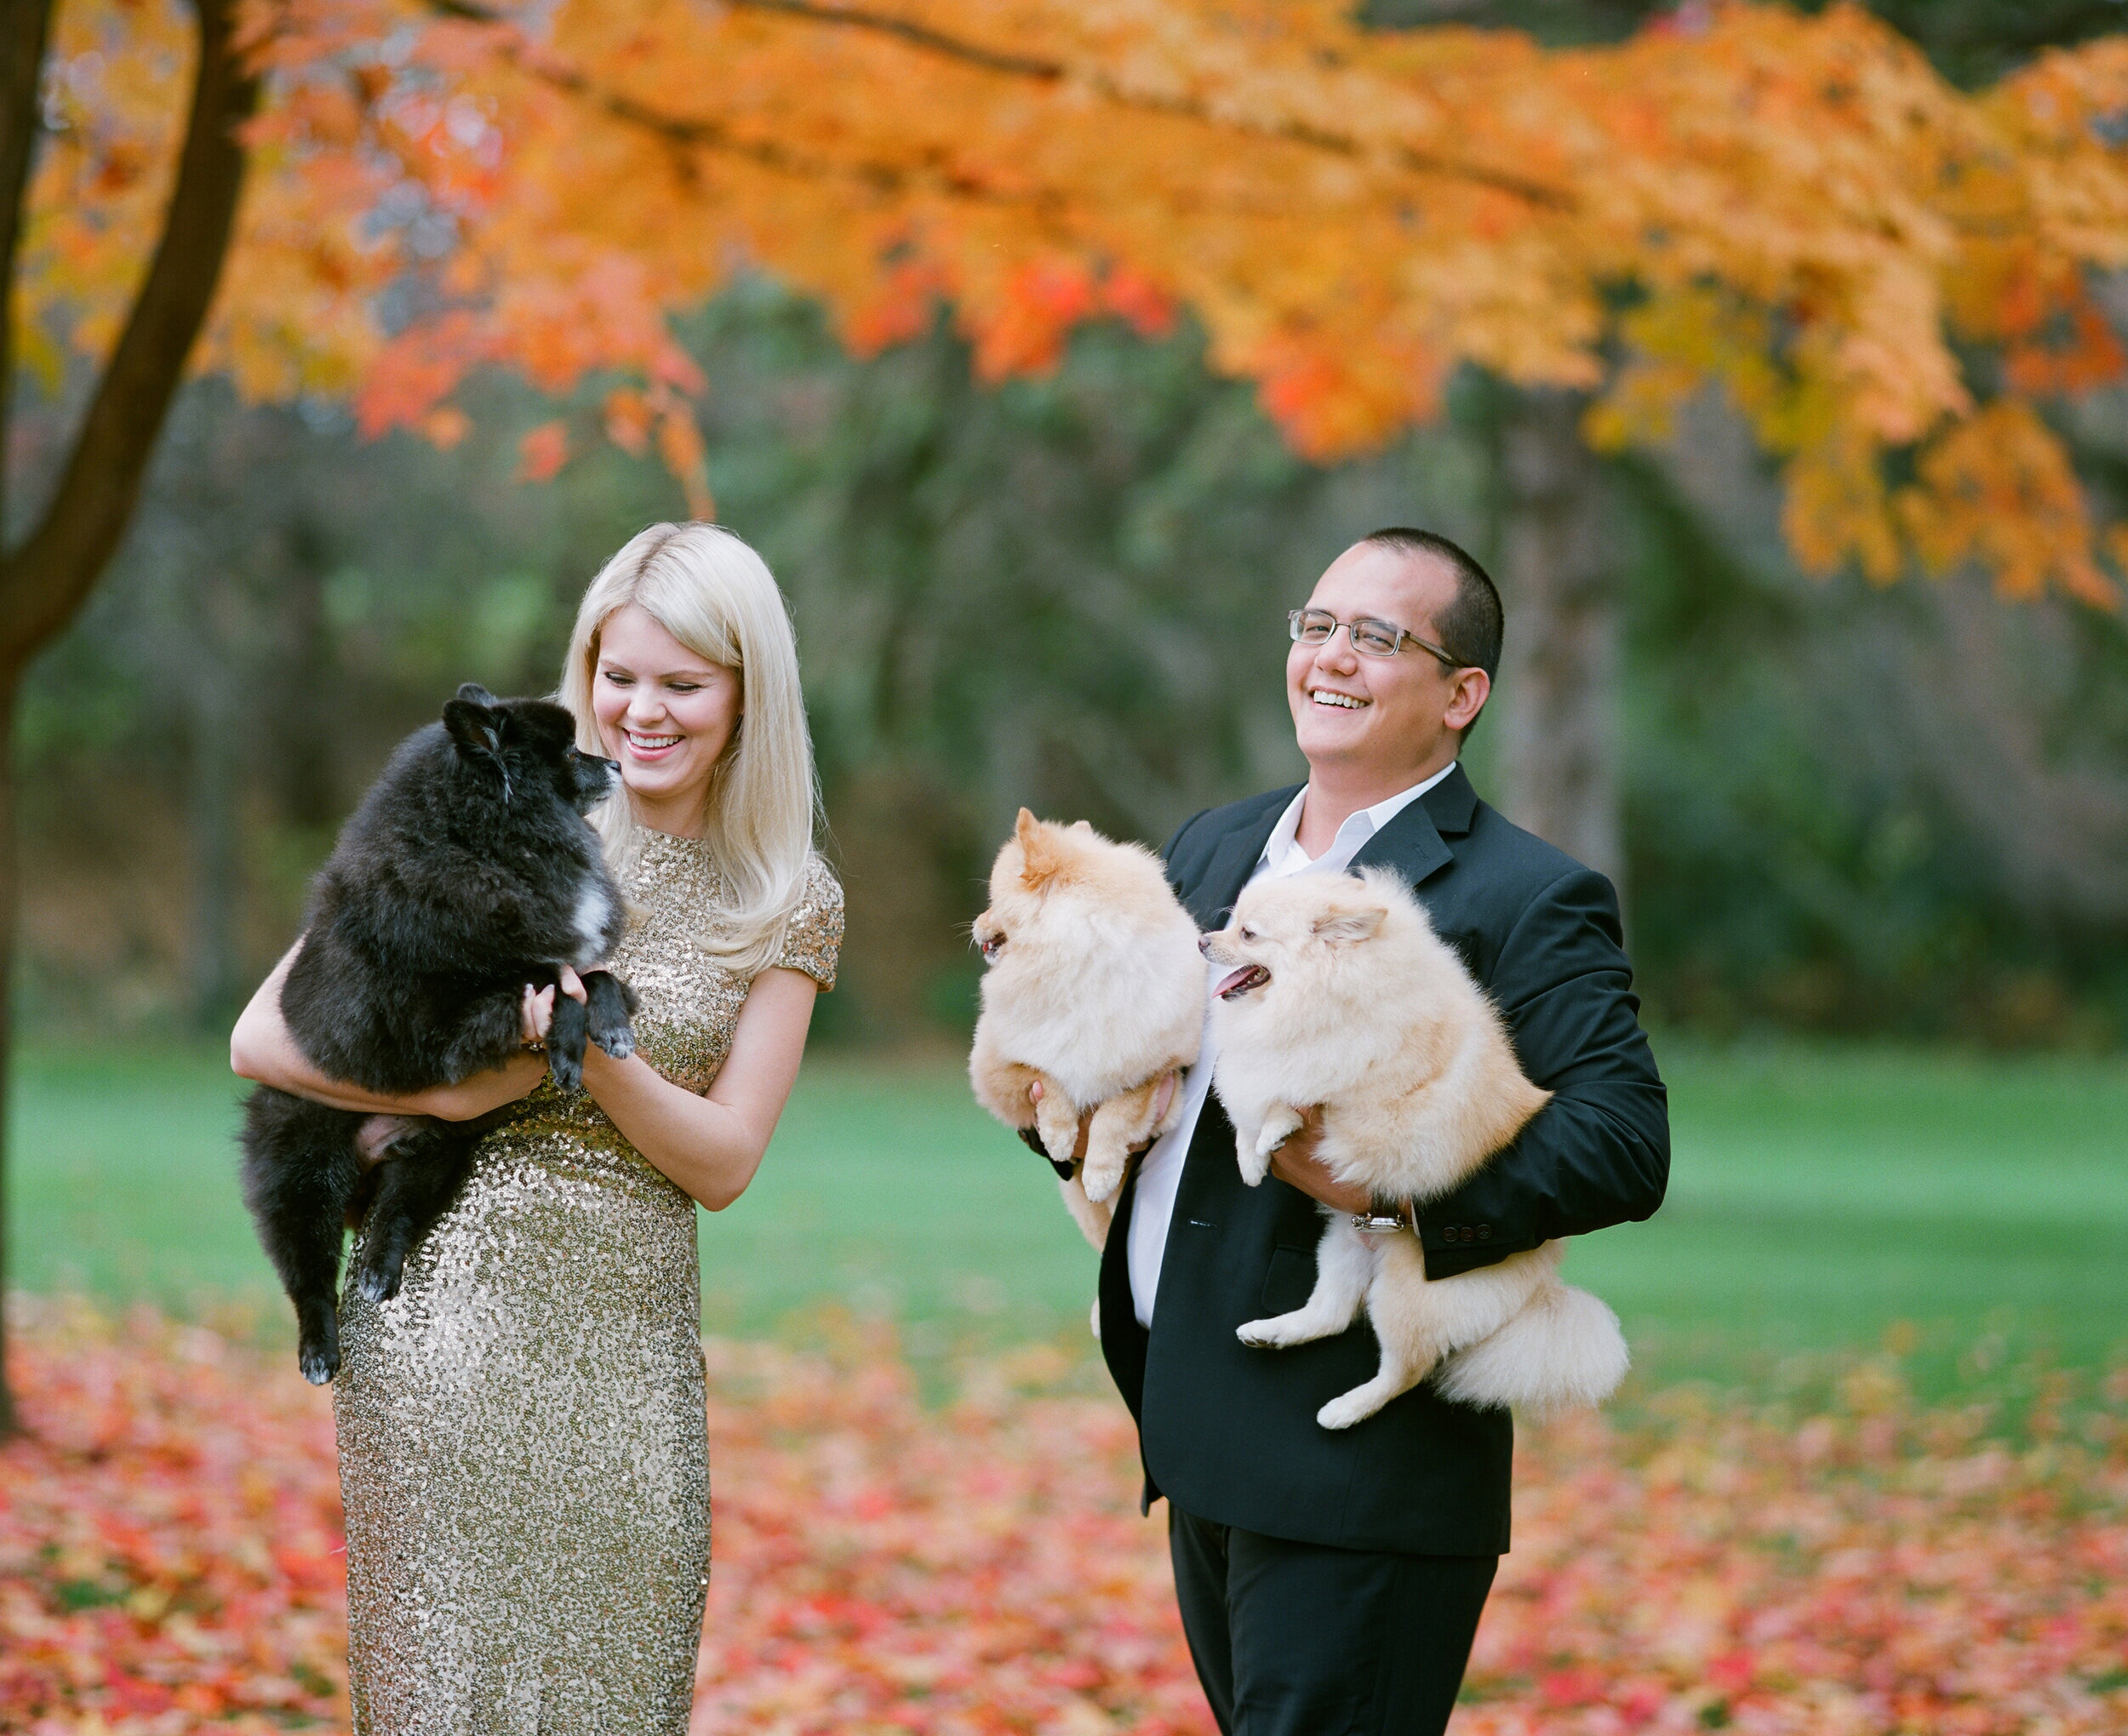 "fall portrait sessions in wausau wisconsin"